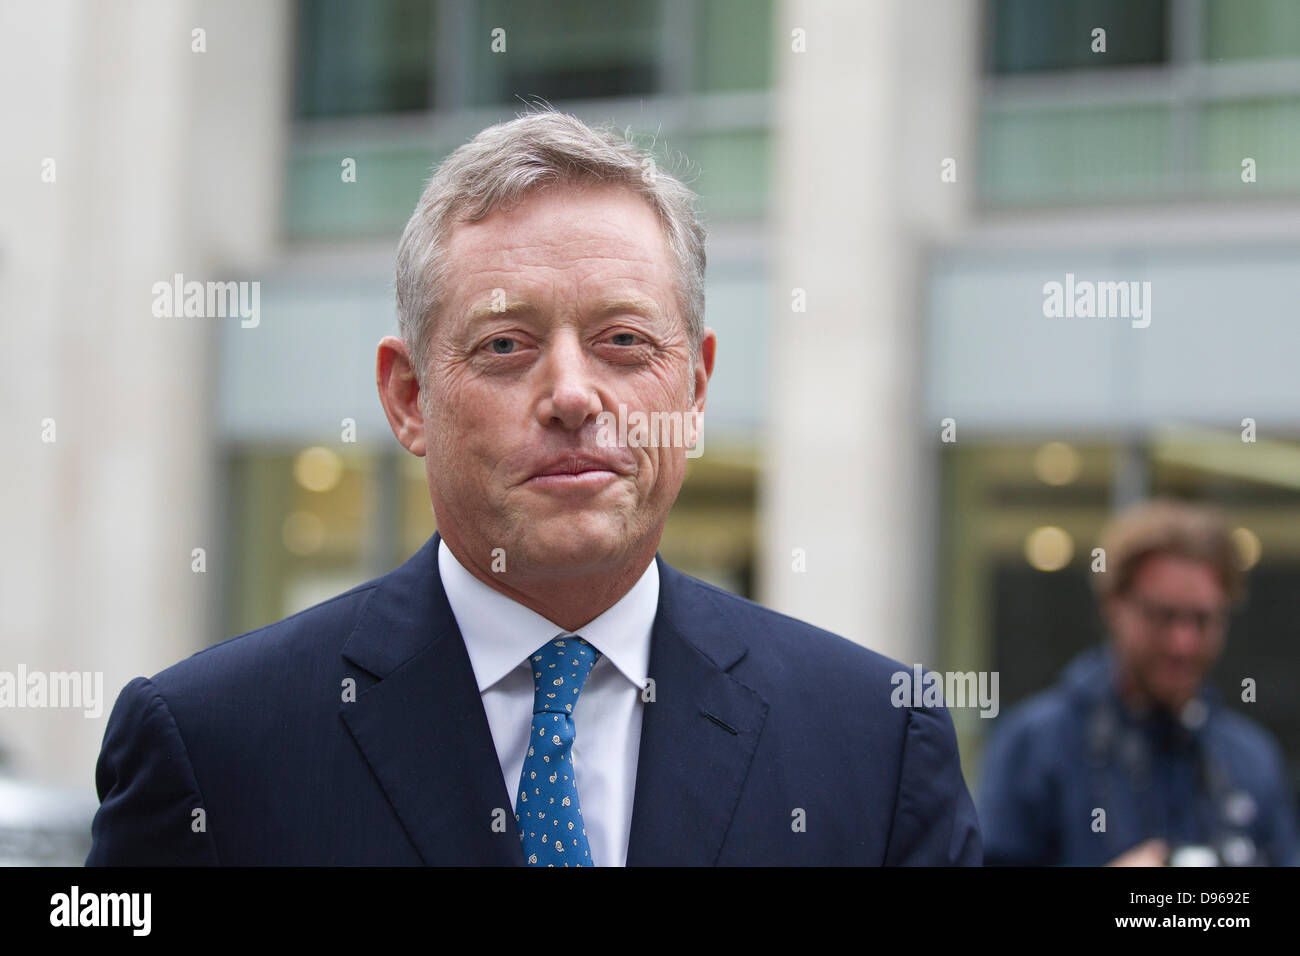 London, UK. 12th June 2013. Alexander Vik, Rolls Building, London, UK Picture shows Alexander Vik, President, Chairman and Chief Executive Officer at Sebastian Holdings Inc. arriving at the Rolls Building, London where he suing Deutsche Bank over $8 Billion fund losses dating back to 2008. Stock Photo